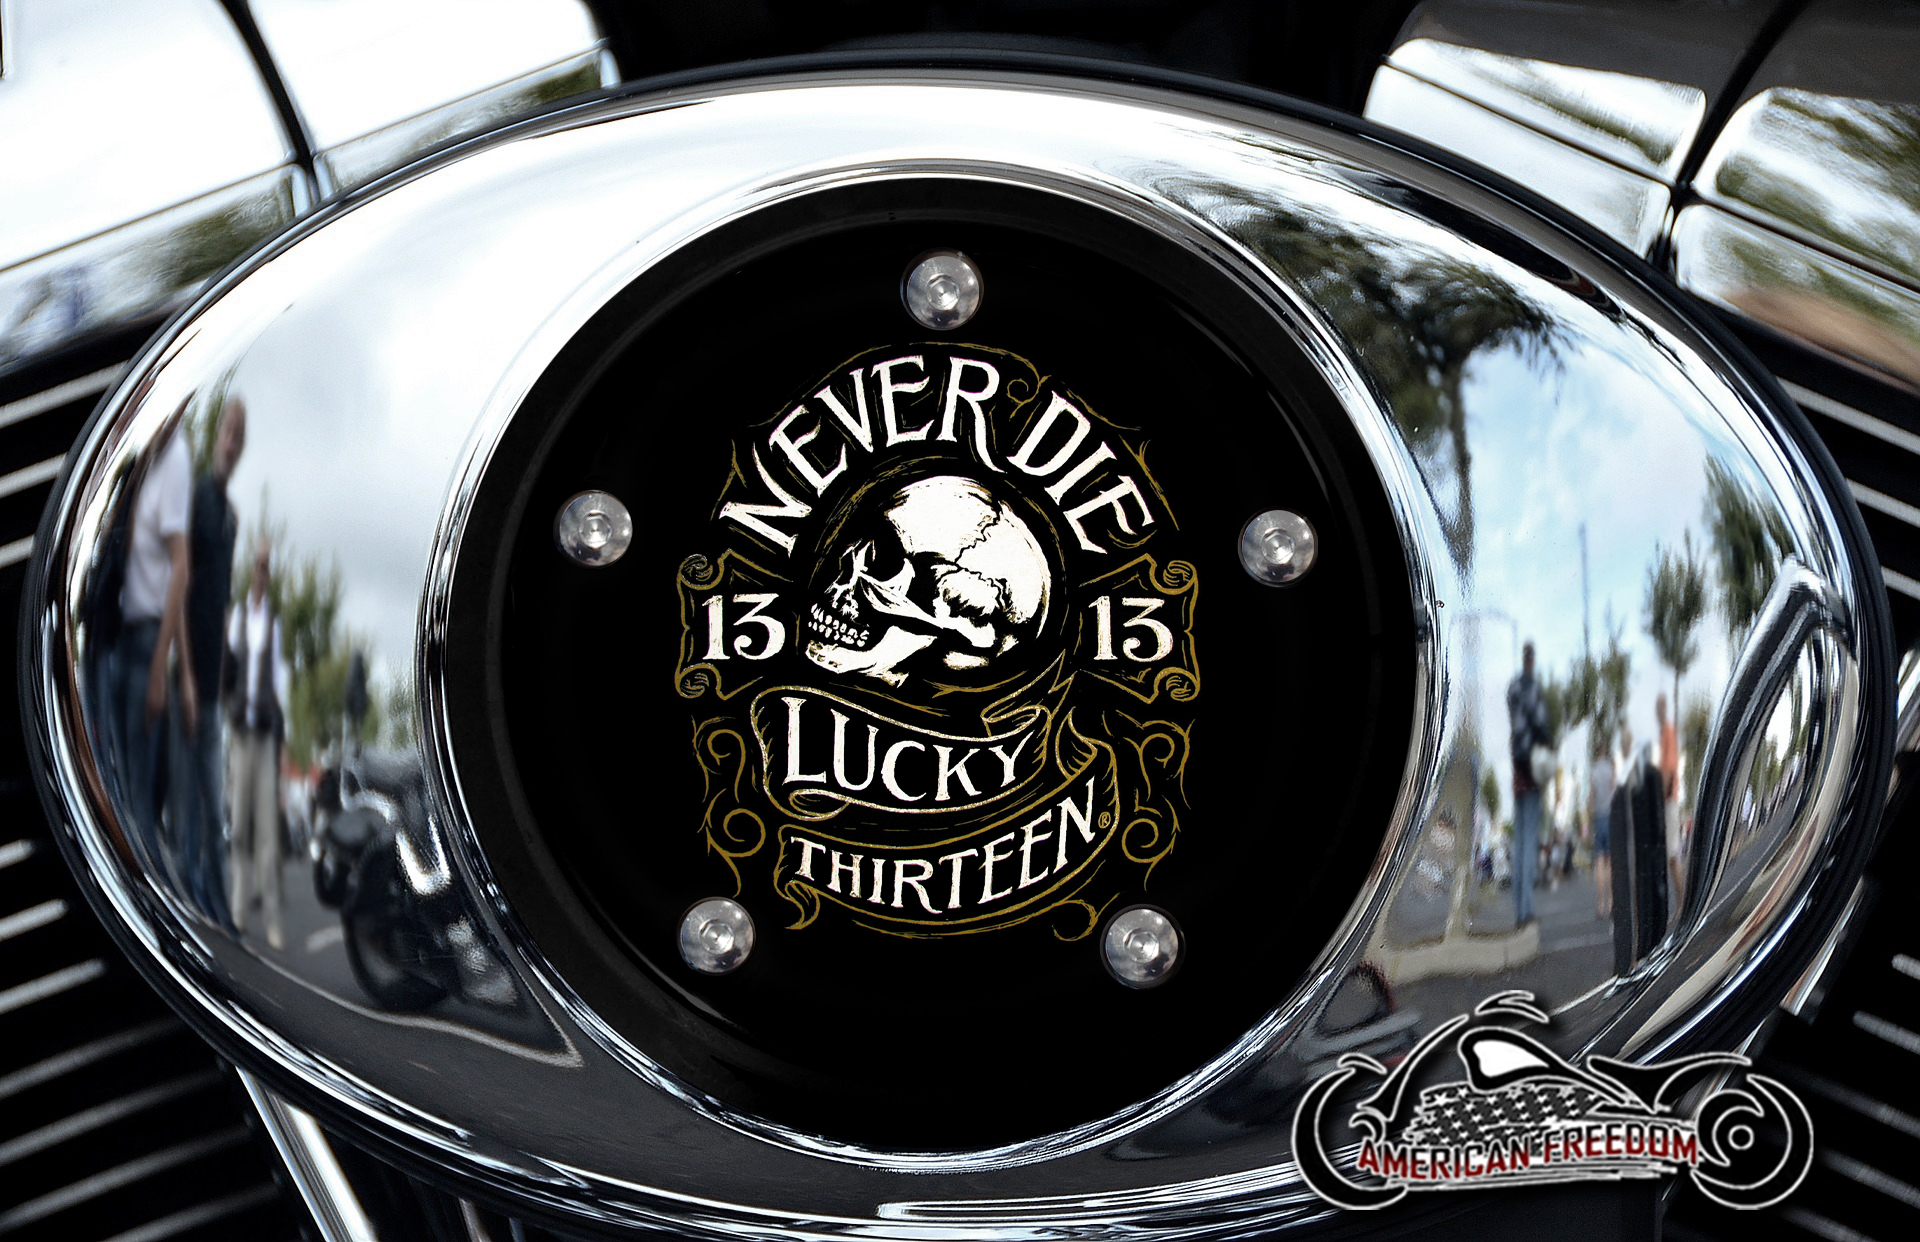 Custom Air Cleaner Cover - Never Die Lucky 13